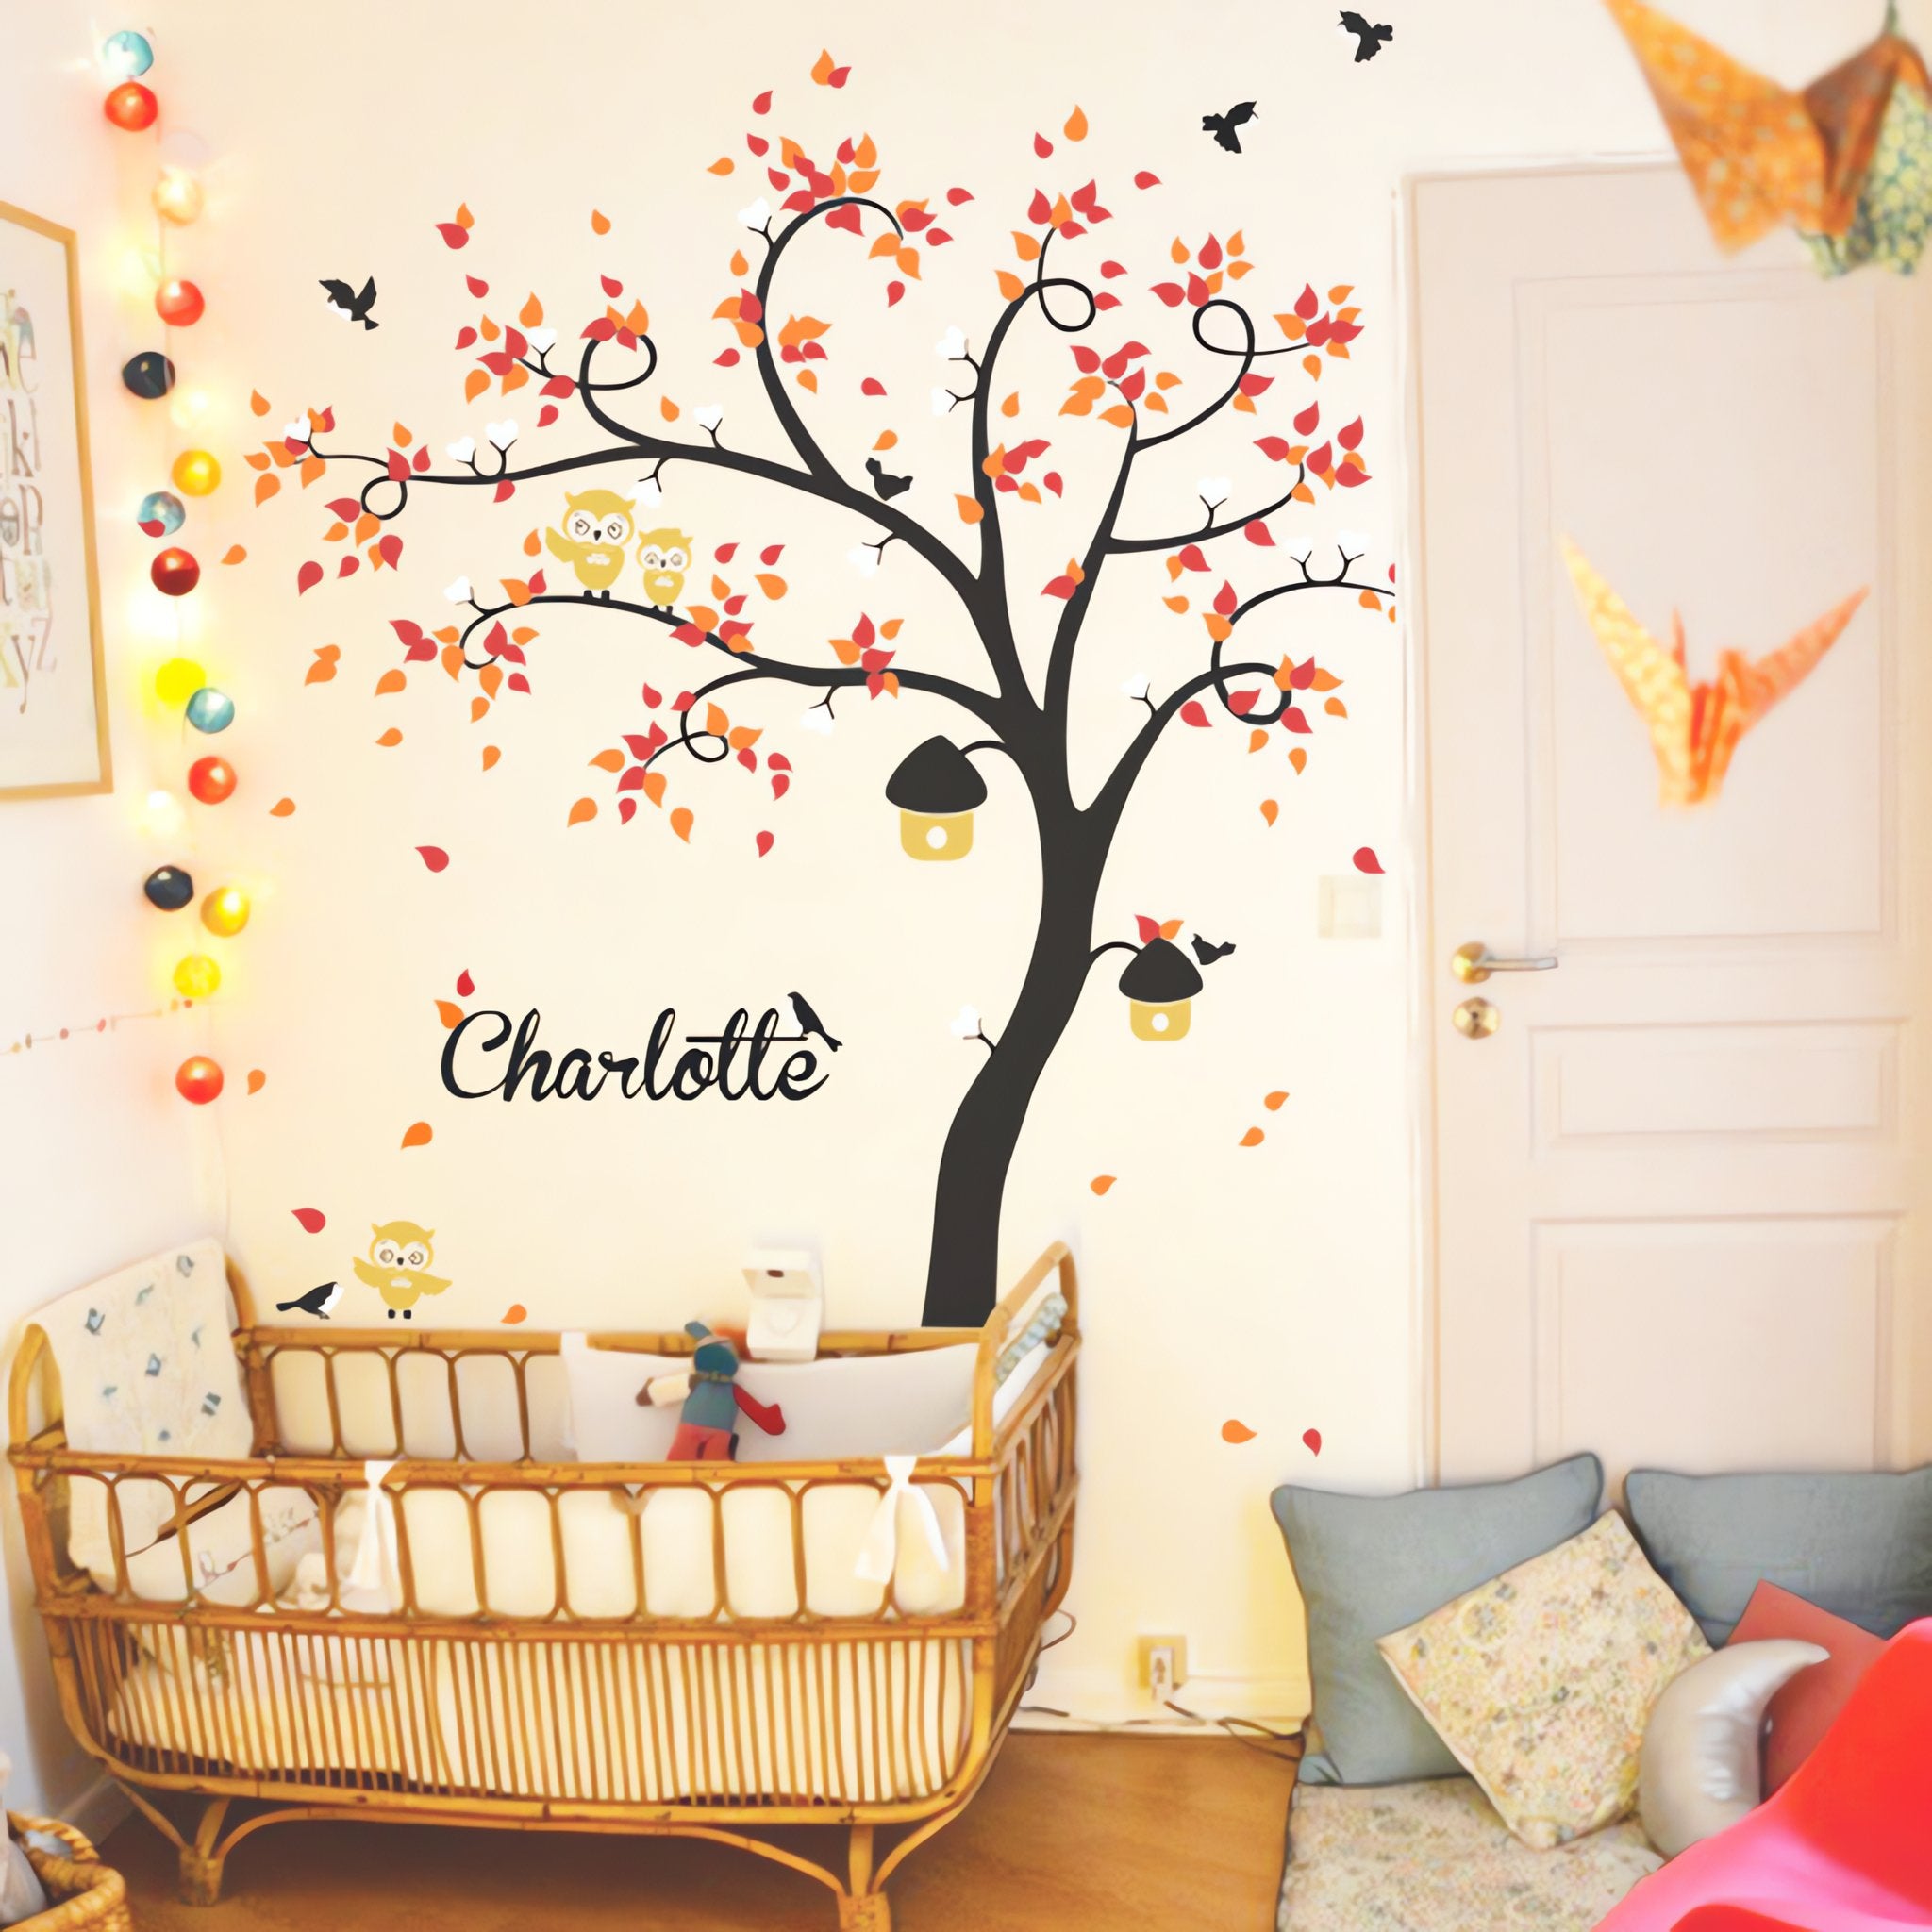 Tree wall sticker with curved trees, birds, owls and the name of a significant loved one in a nursery with a crib and a chair.